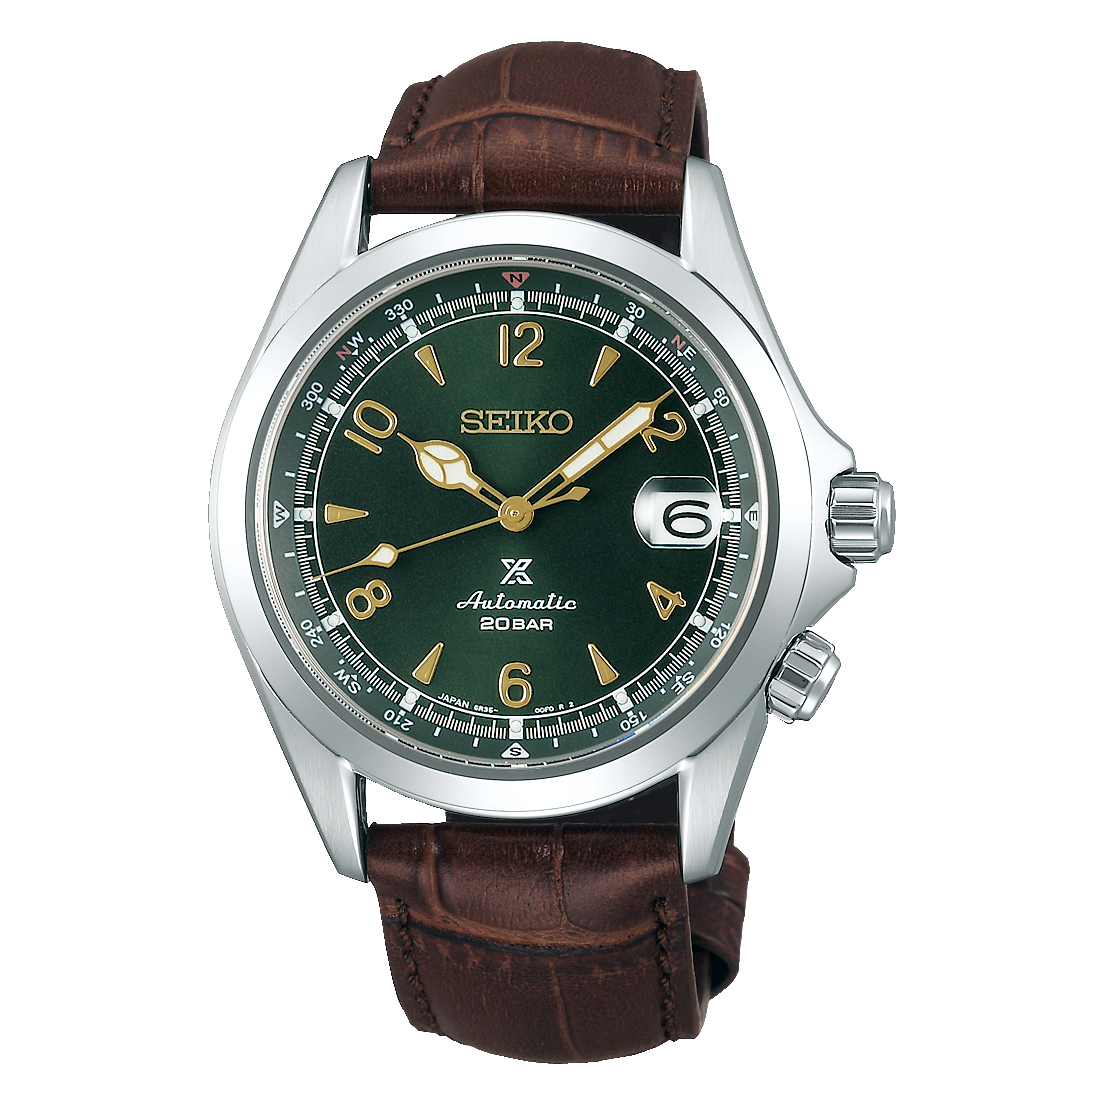 Seiko Prospex Alpinist SPB121J1 39.5mm 200m WR automatic men's watch sapphire crystal with magnifier leather band